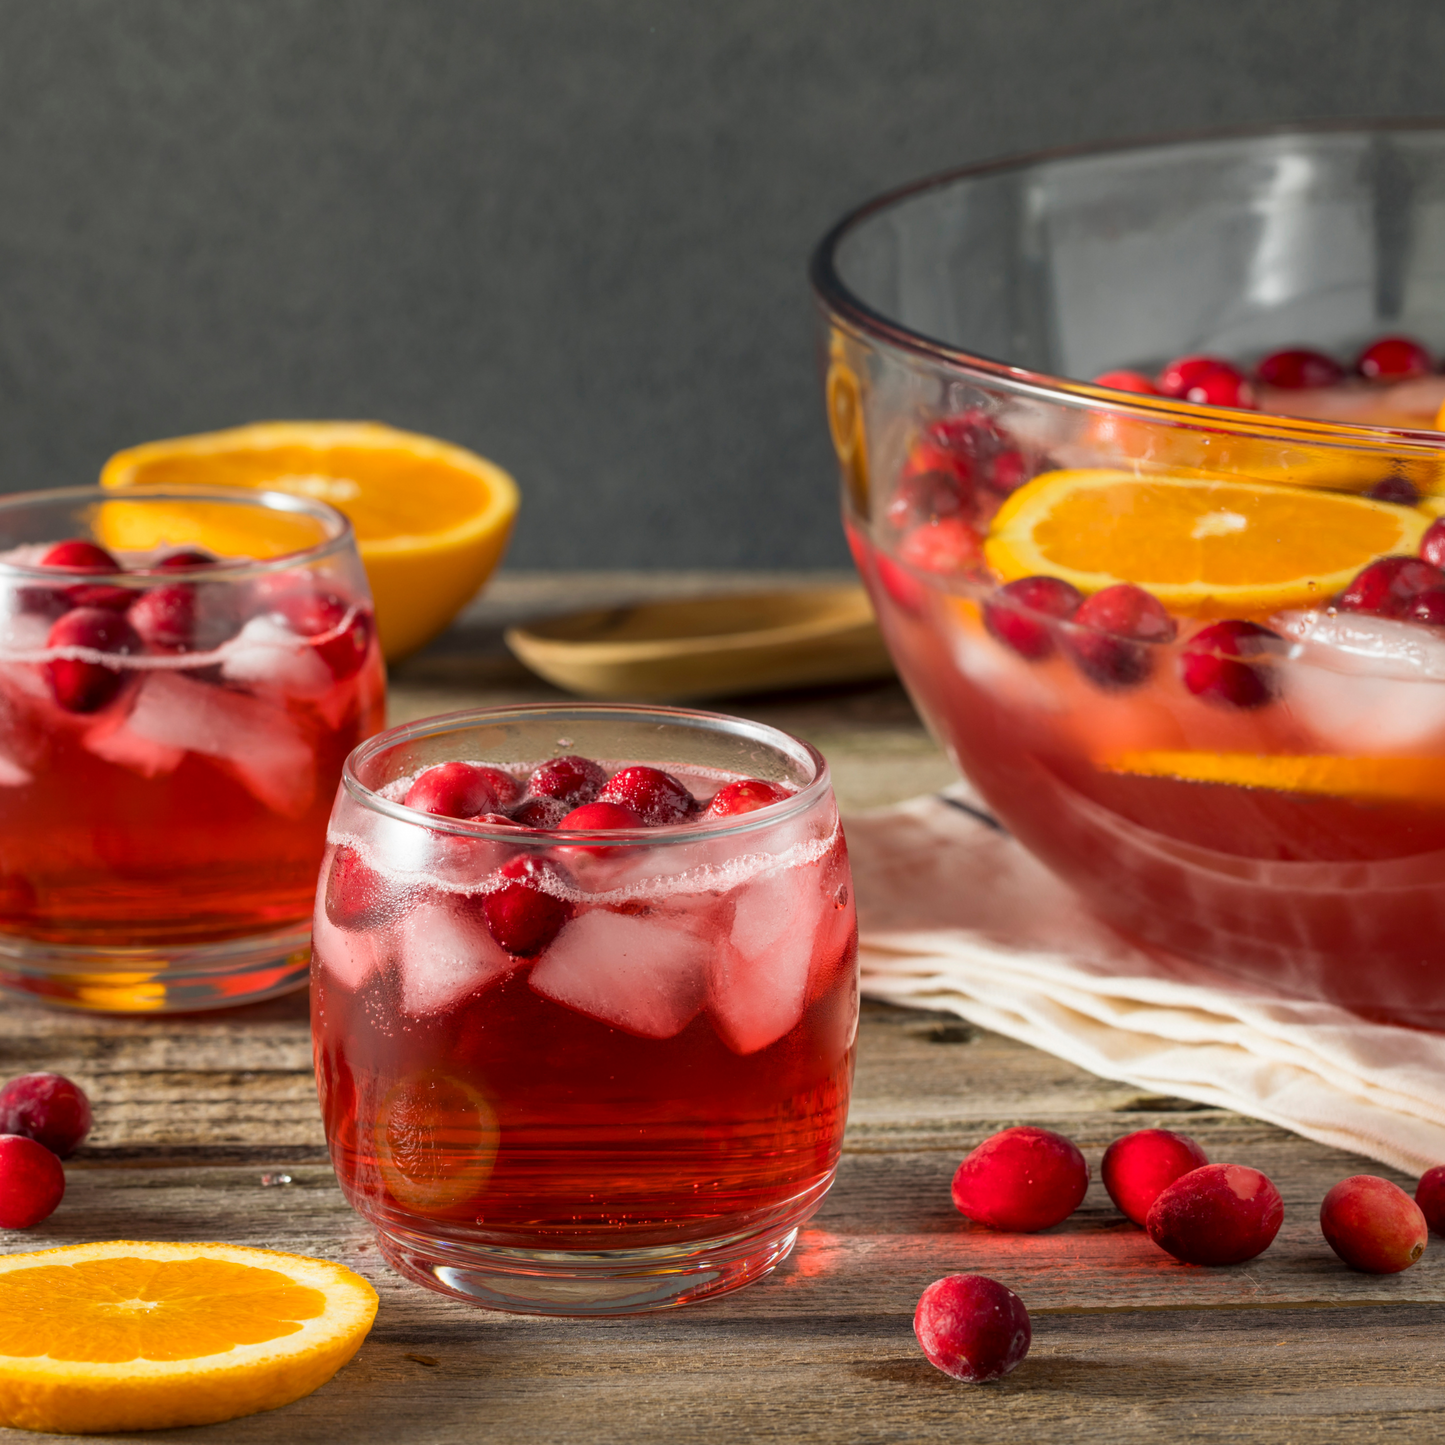 Load image into Gallery viewer, Hive Craft Cocktails Holiday Spirits - Festive Blend from Thanksgiving through New Year&amp;#39;s Celebrations
